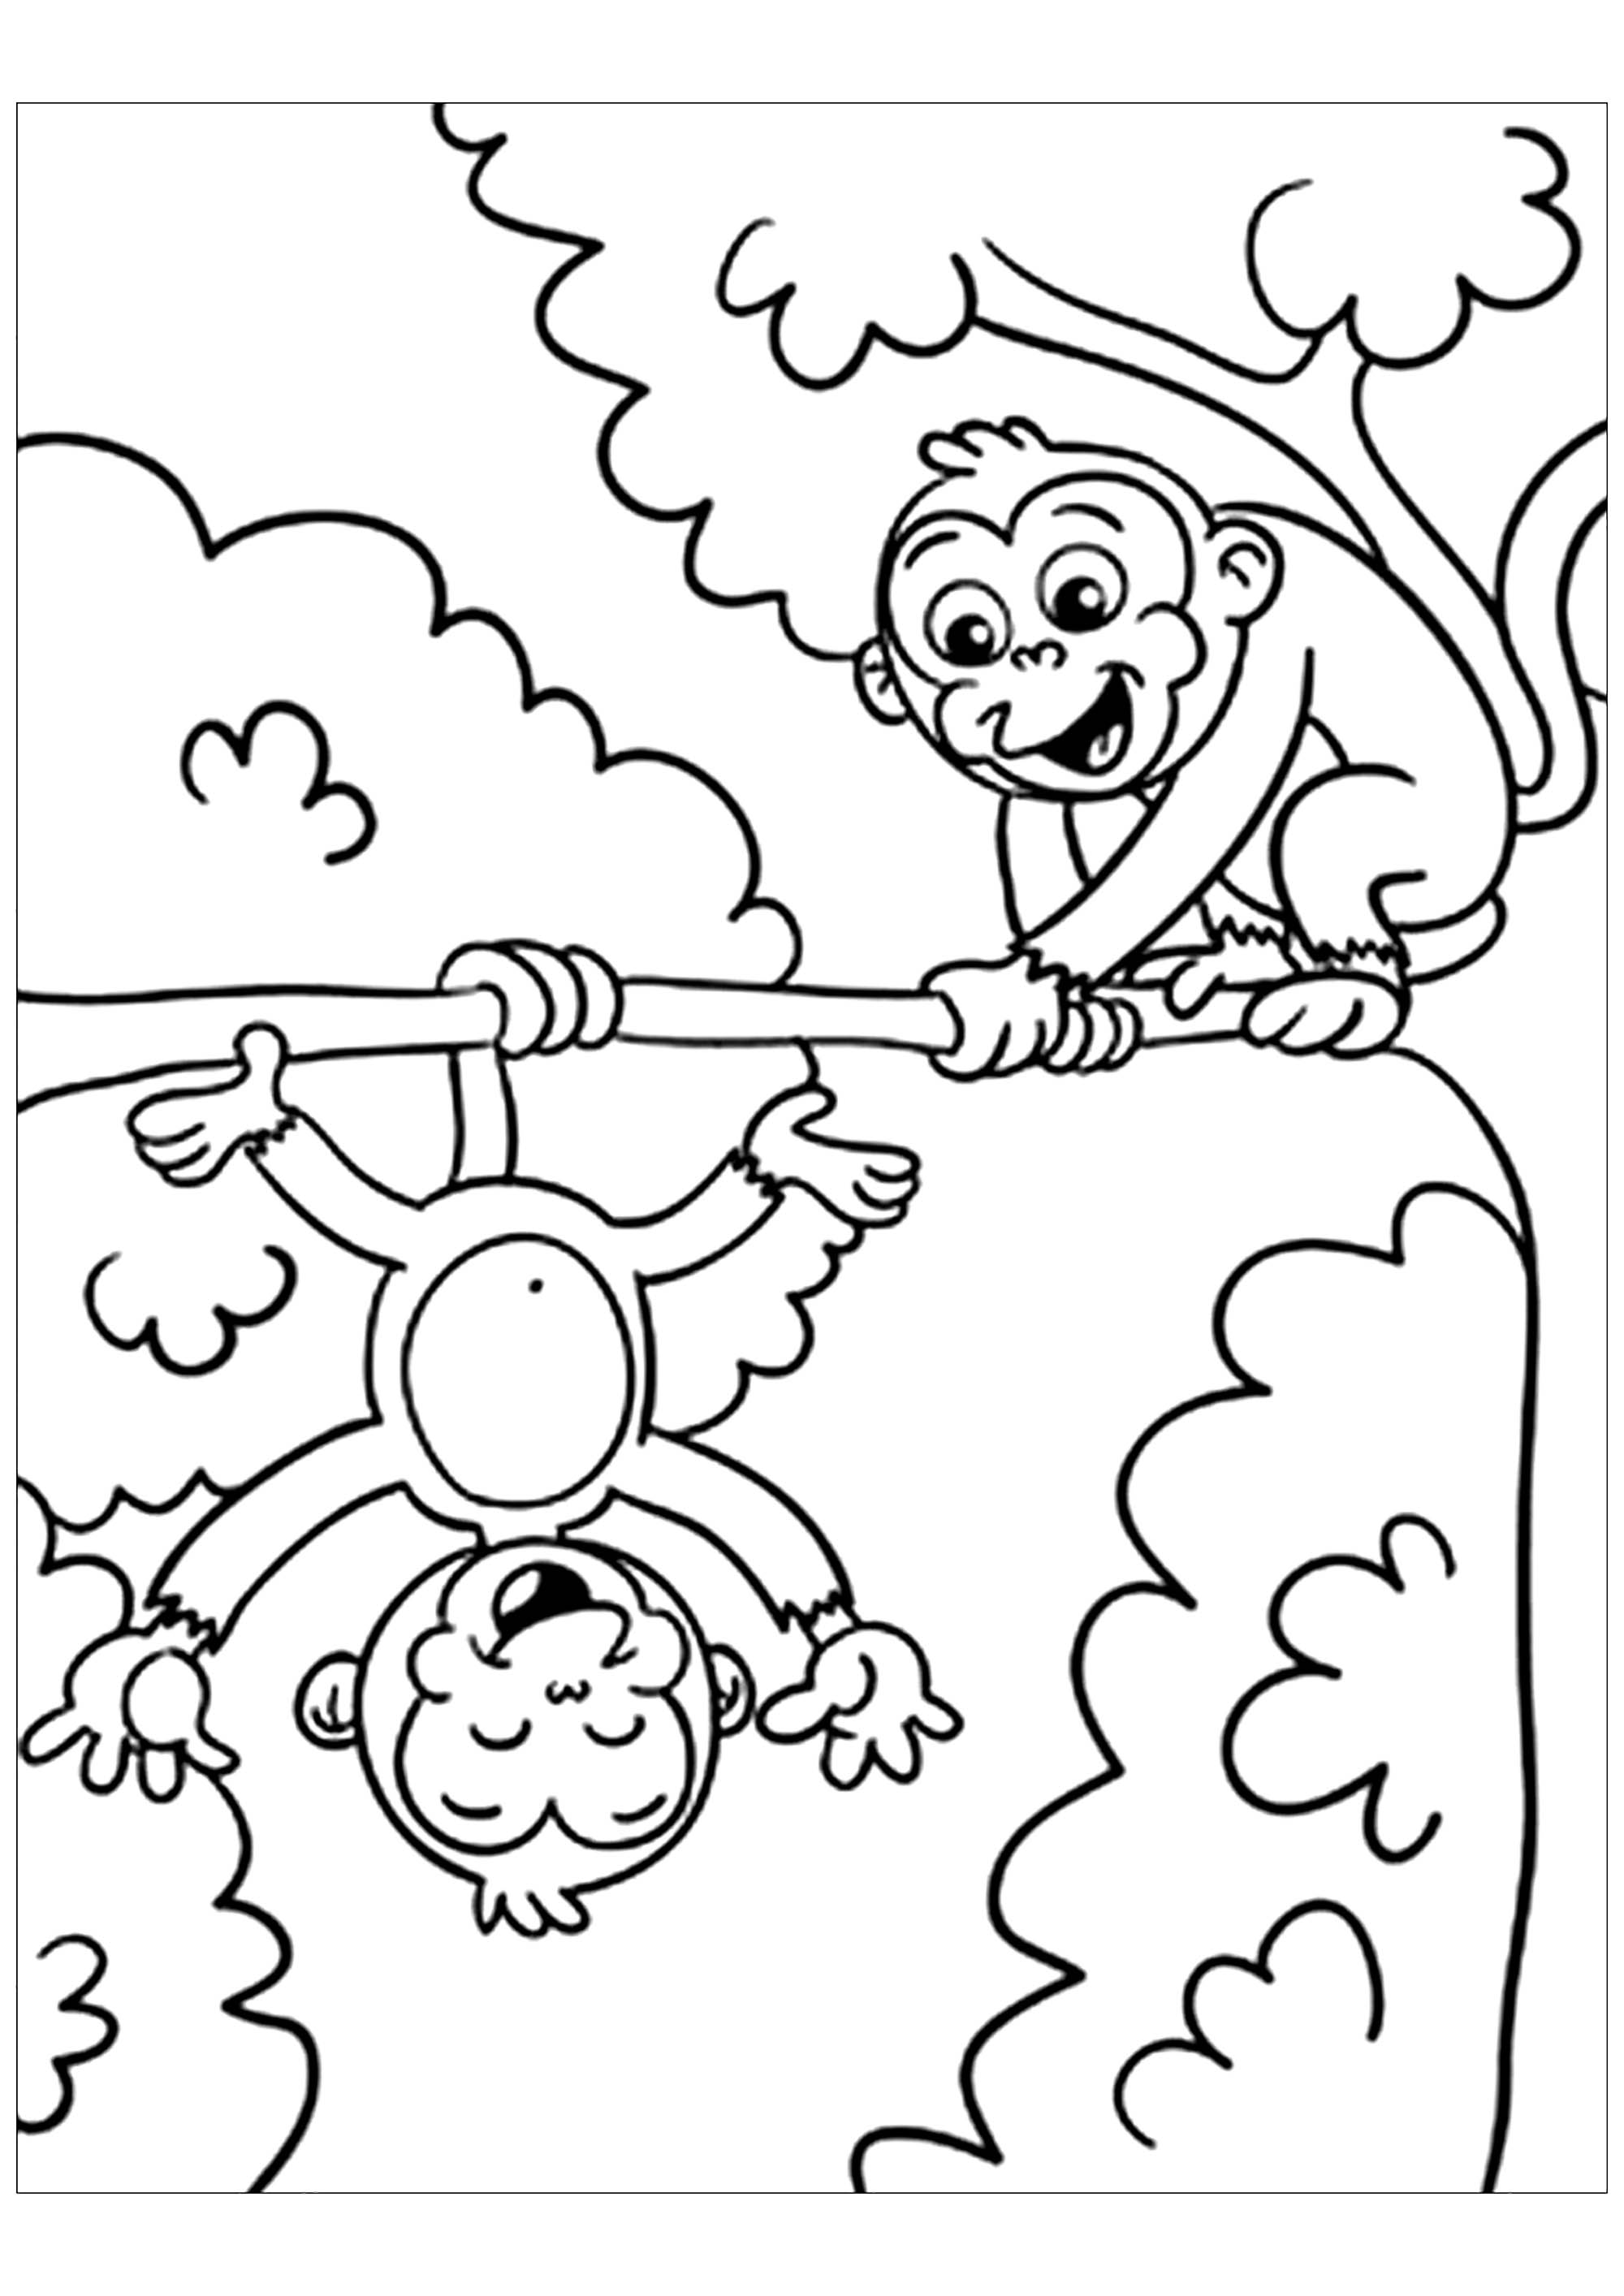 coloring-pages-coloring-pages-for-children-monkeys